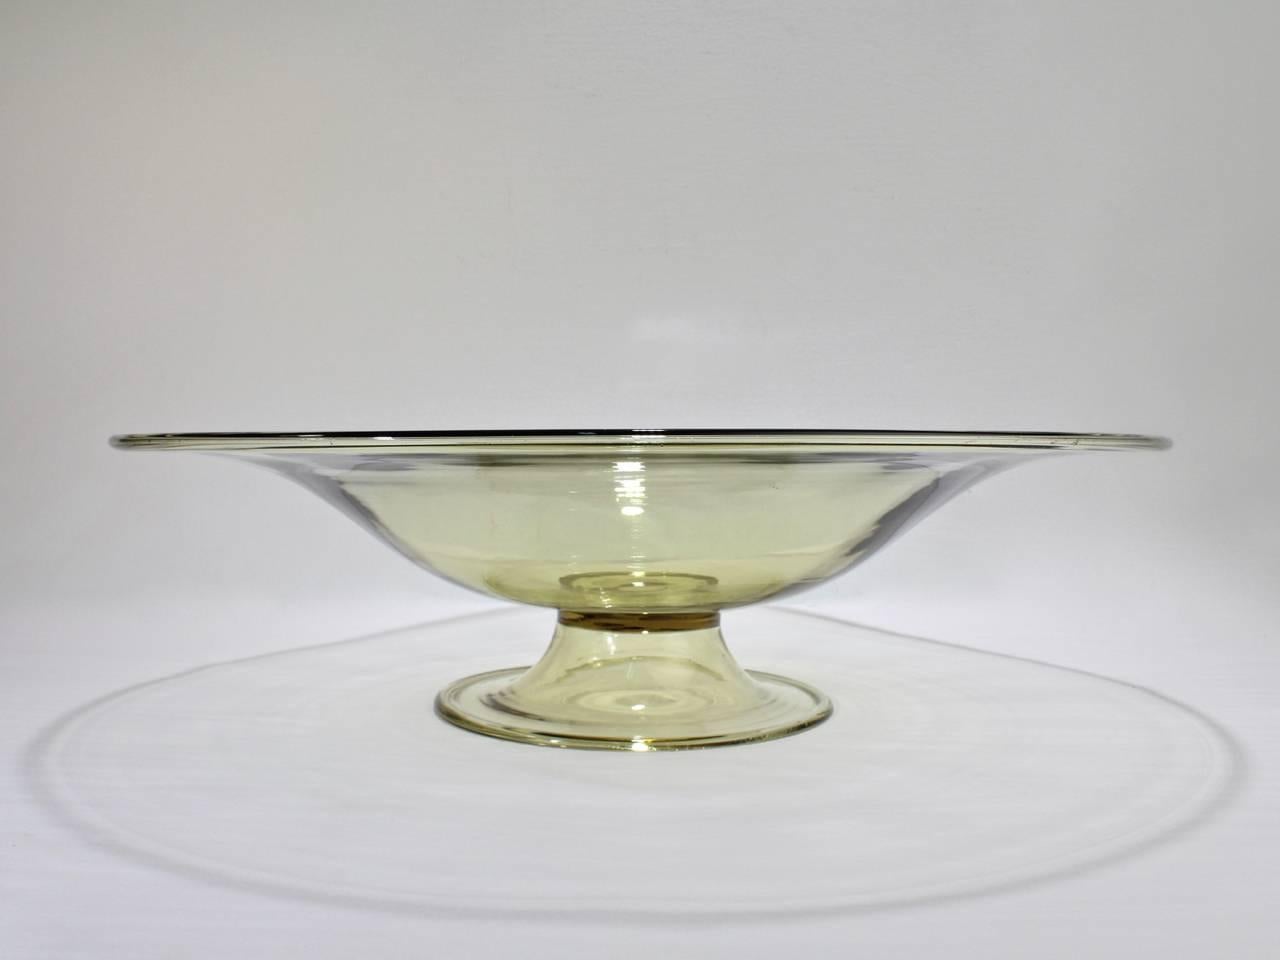 Italian Large Venetian Midcentury Glass Footed Bowl Centrepiece Attributed to Salviati